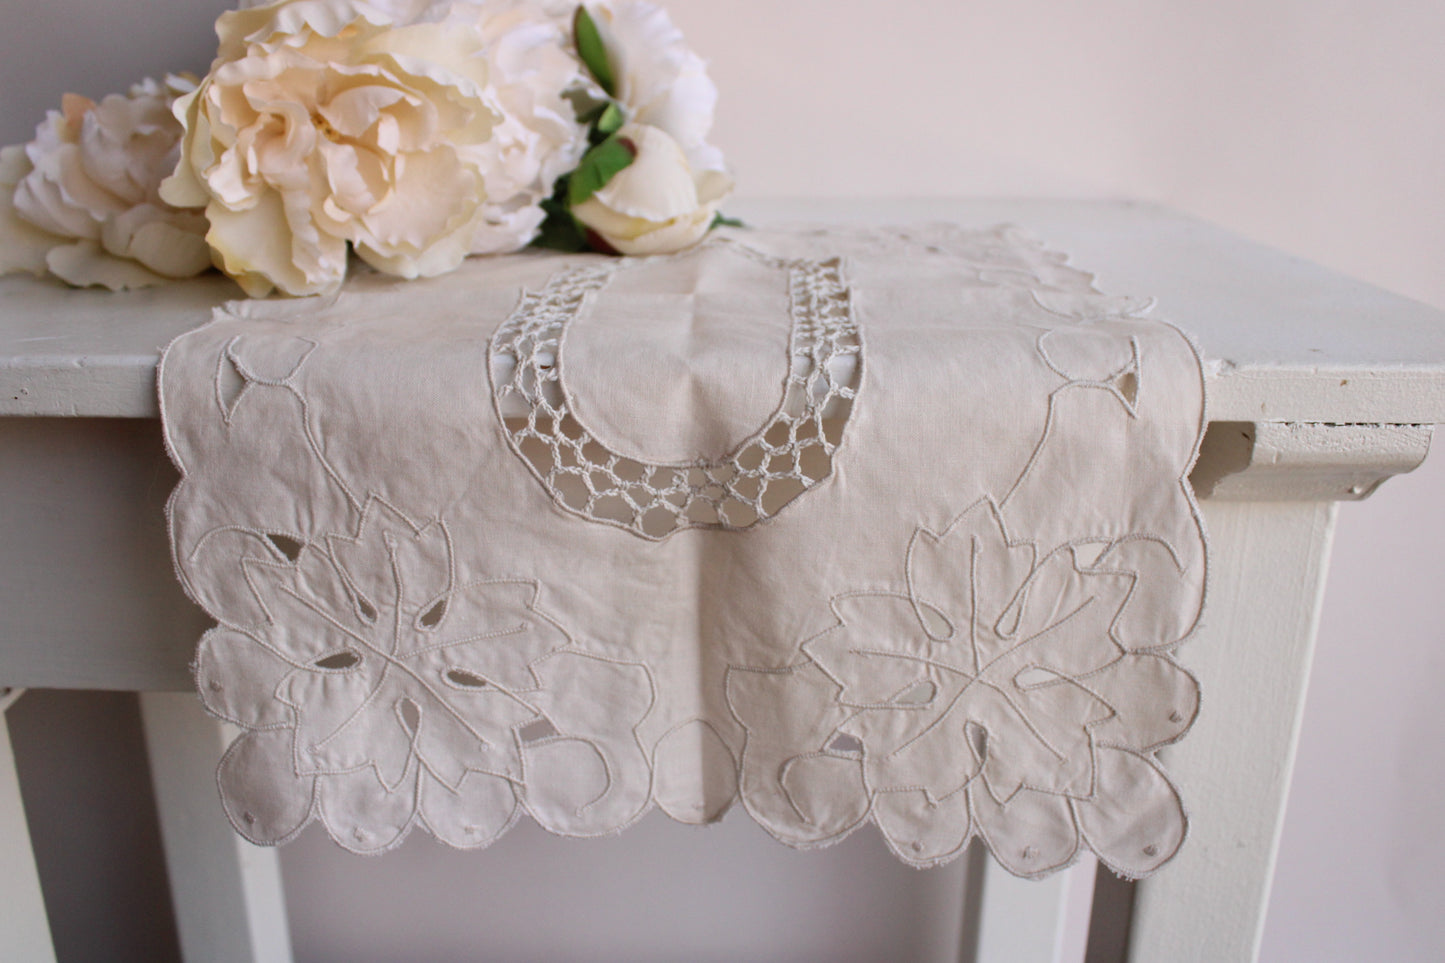 Vintage 1960s 1970s Embroidered Doily